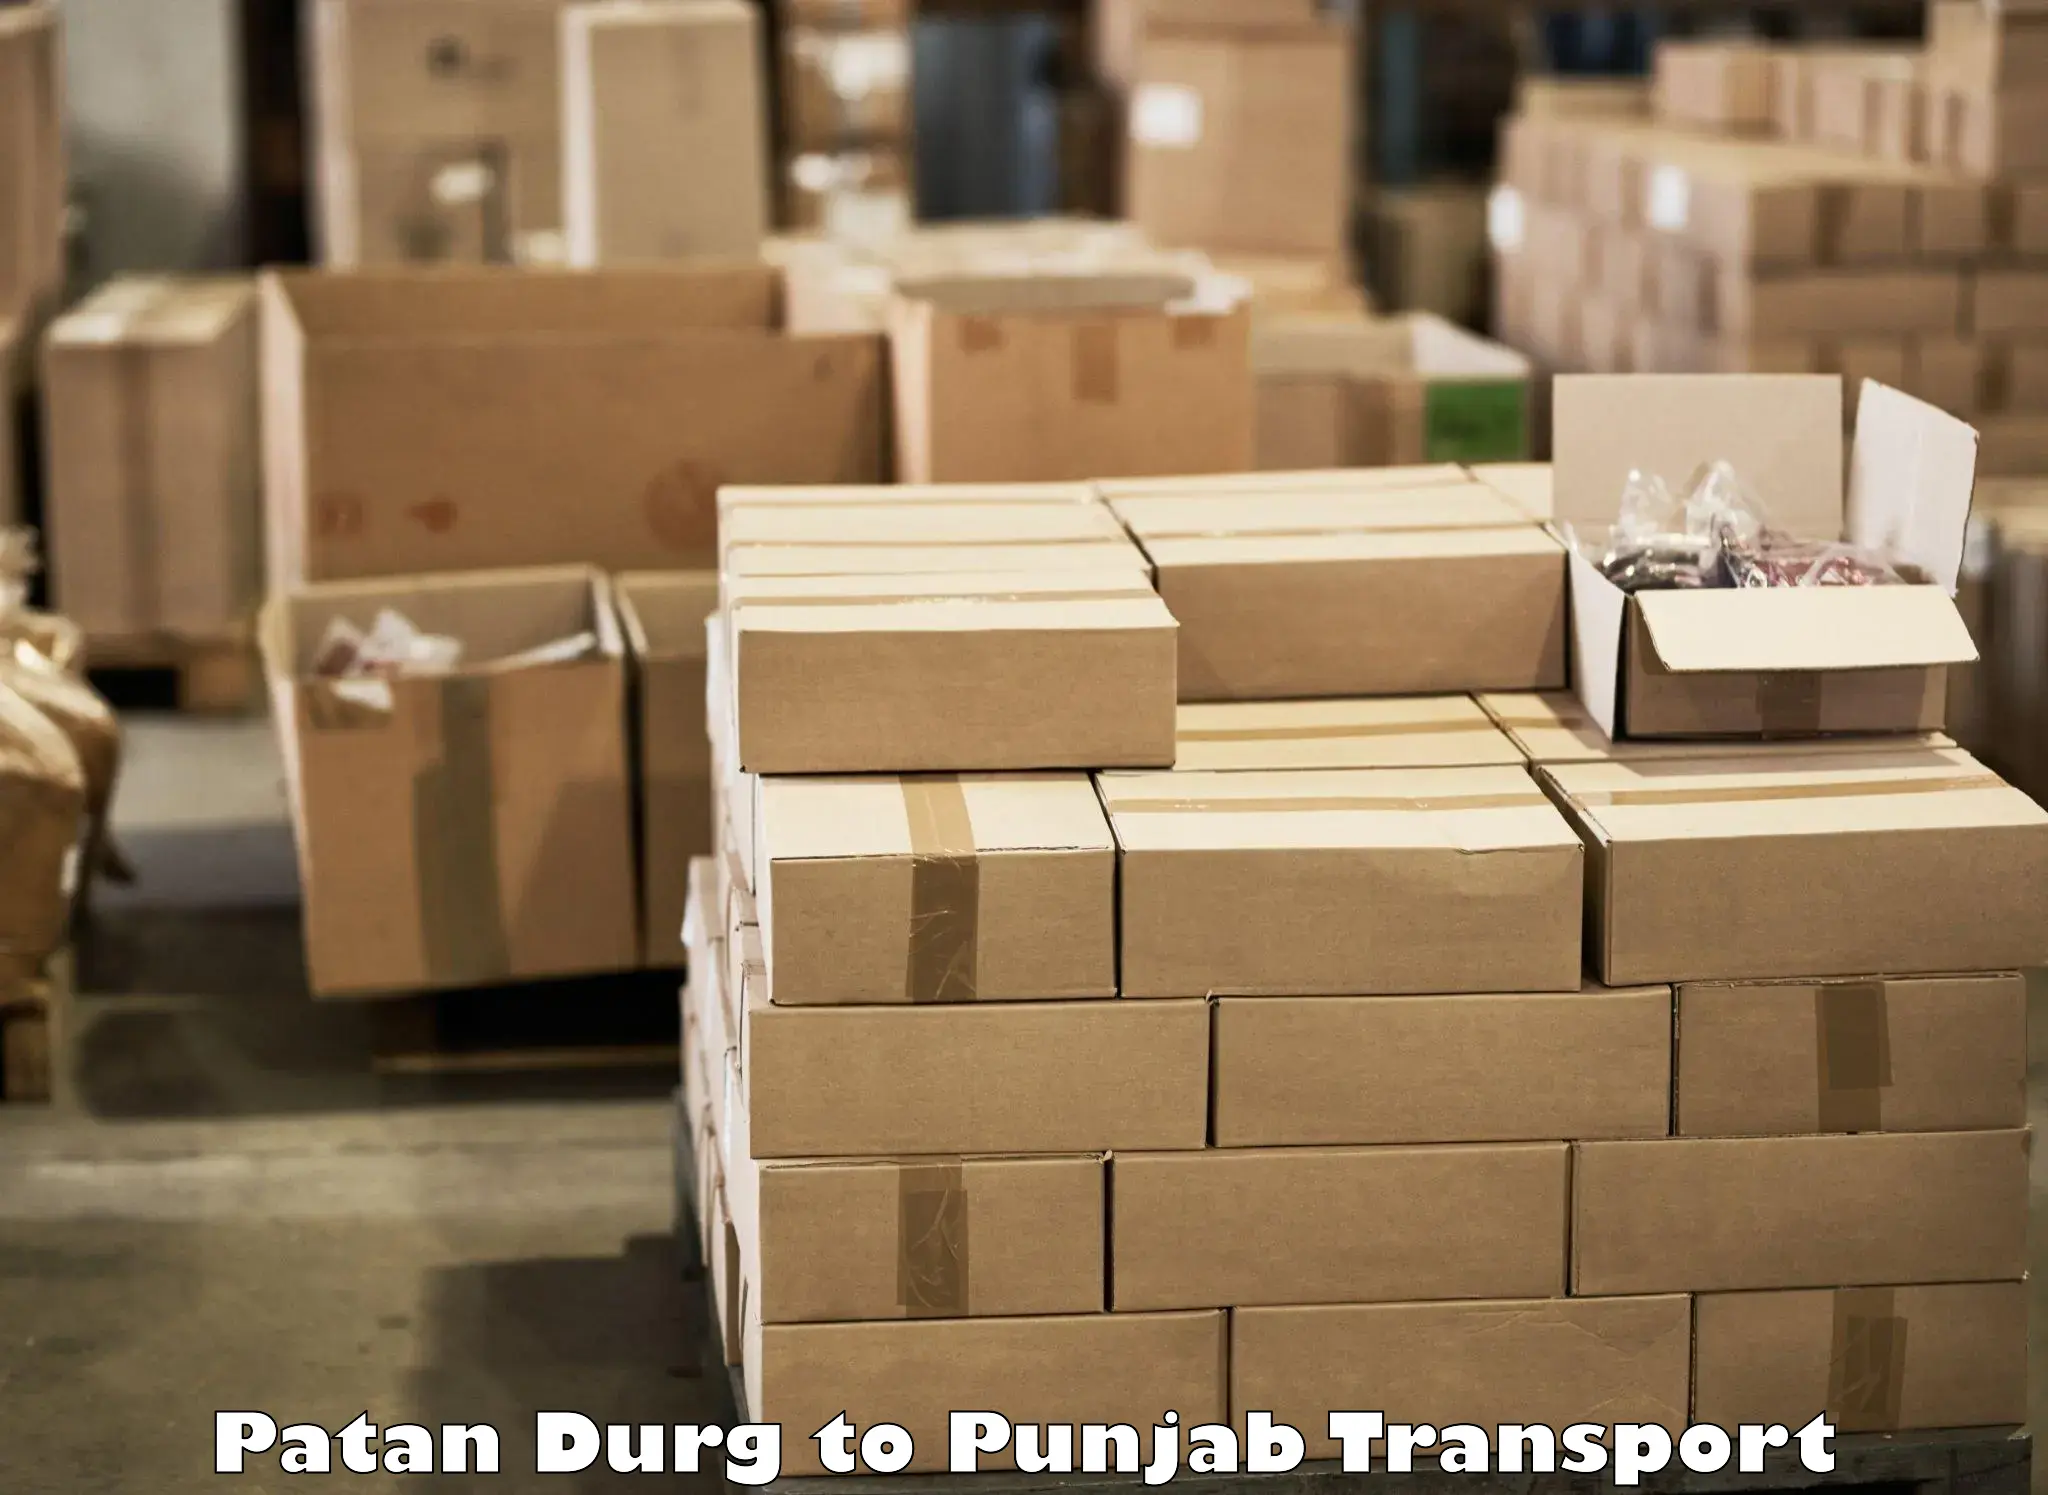 Daily transport service Patan Durg to Ludhiana